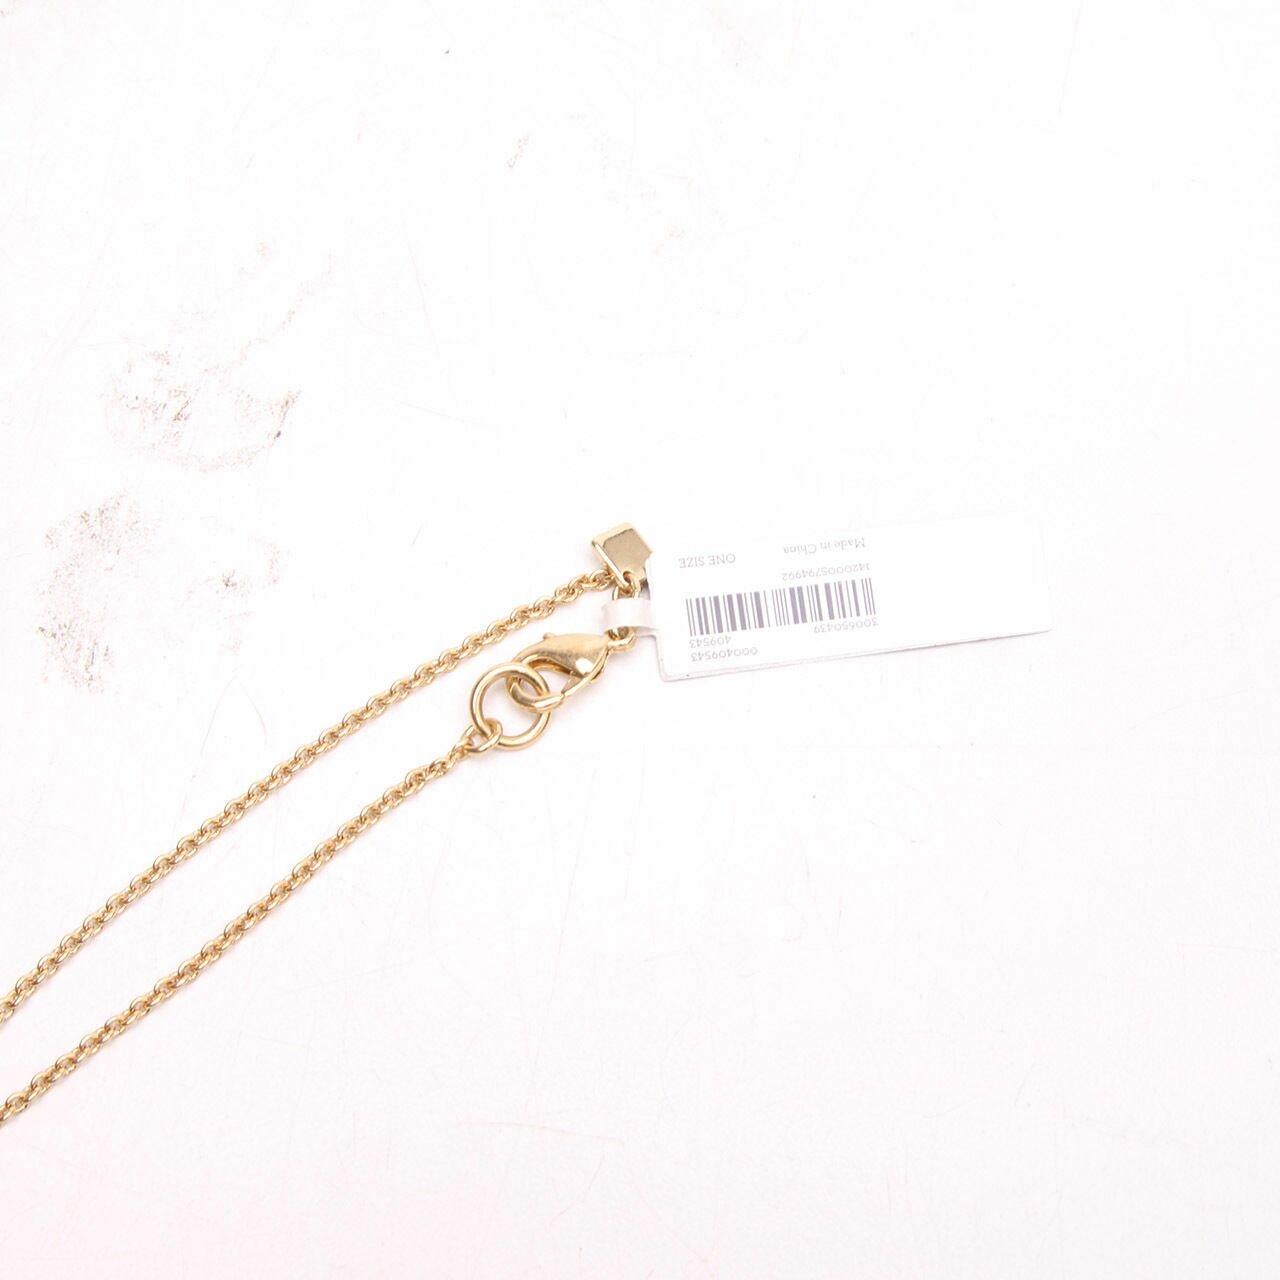 Banana Republic Gold Necklace Jewelry